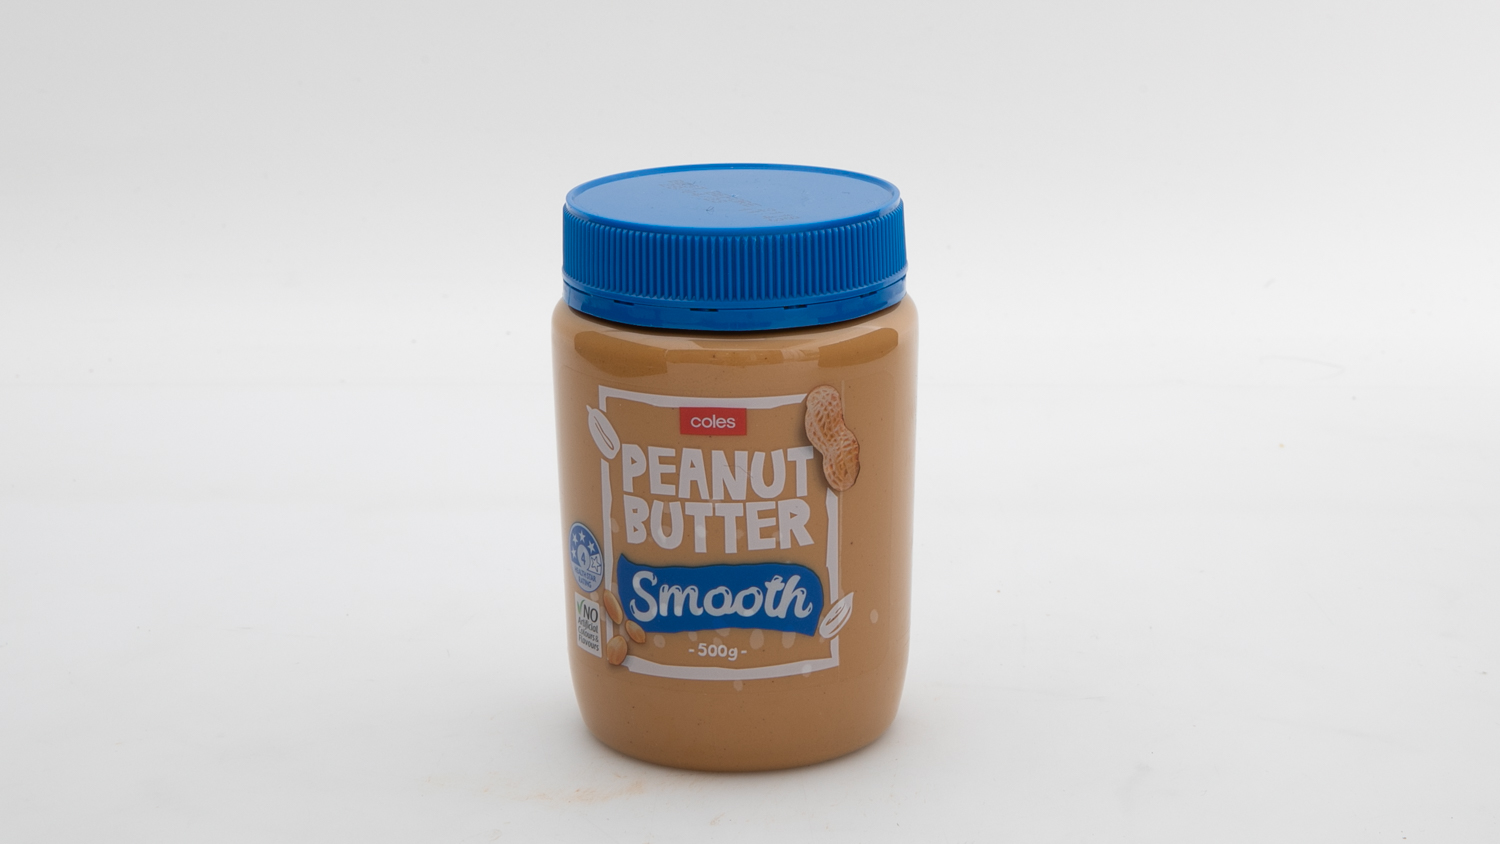 Coles Peanut Butter Smooth carousel image